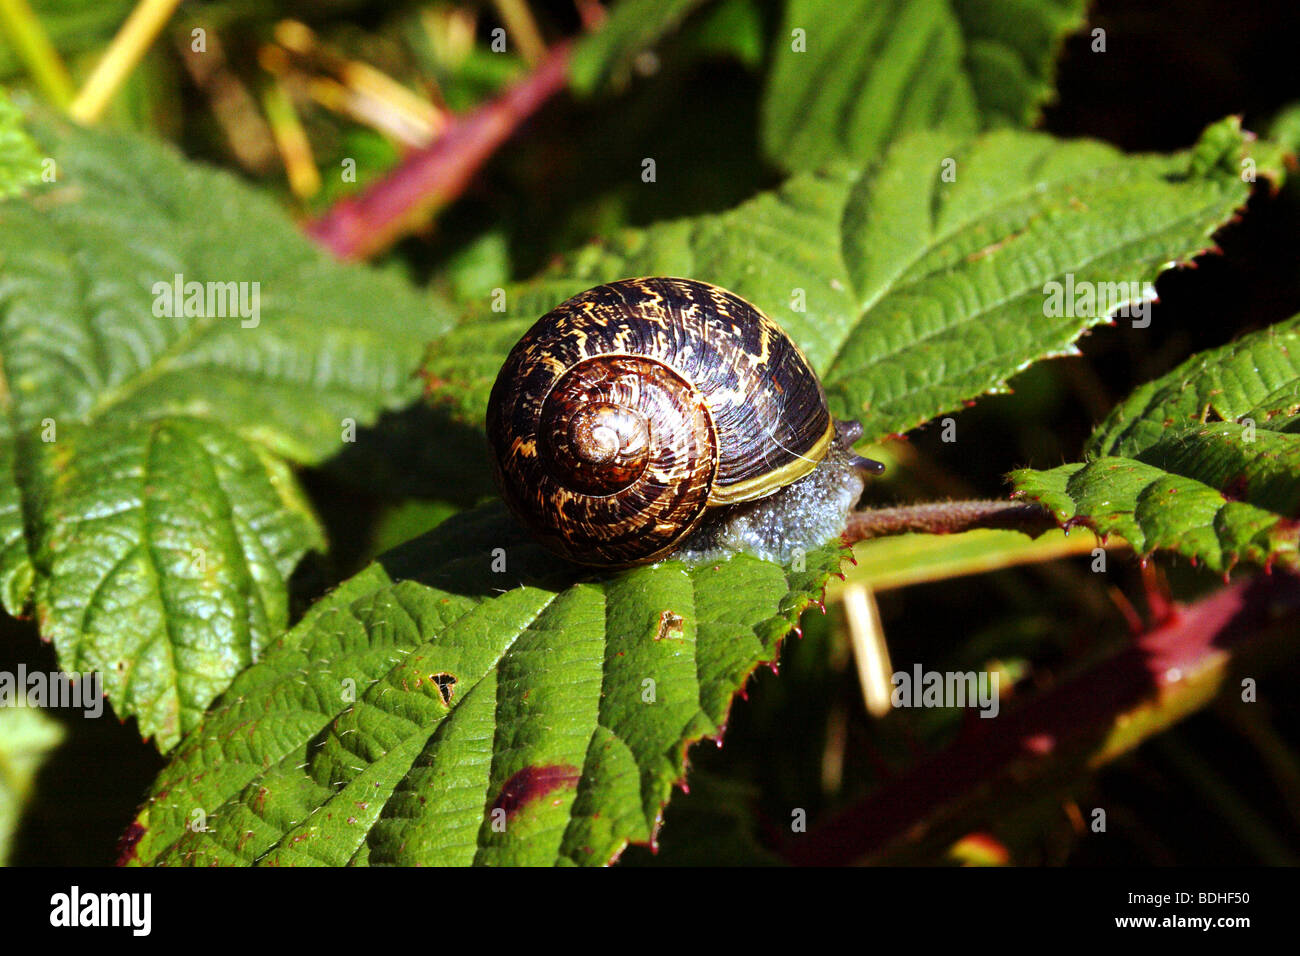 Garden Snail Helix aspera Family Helicidae showing classic helical shell Stock Photo